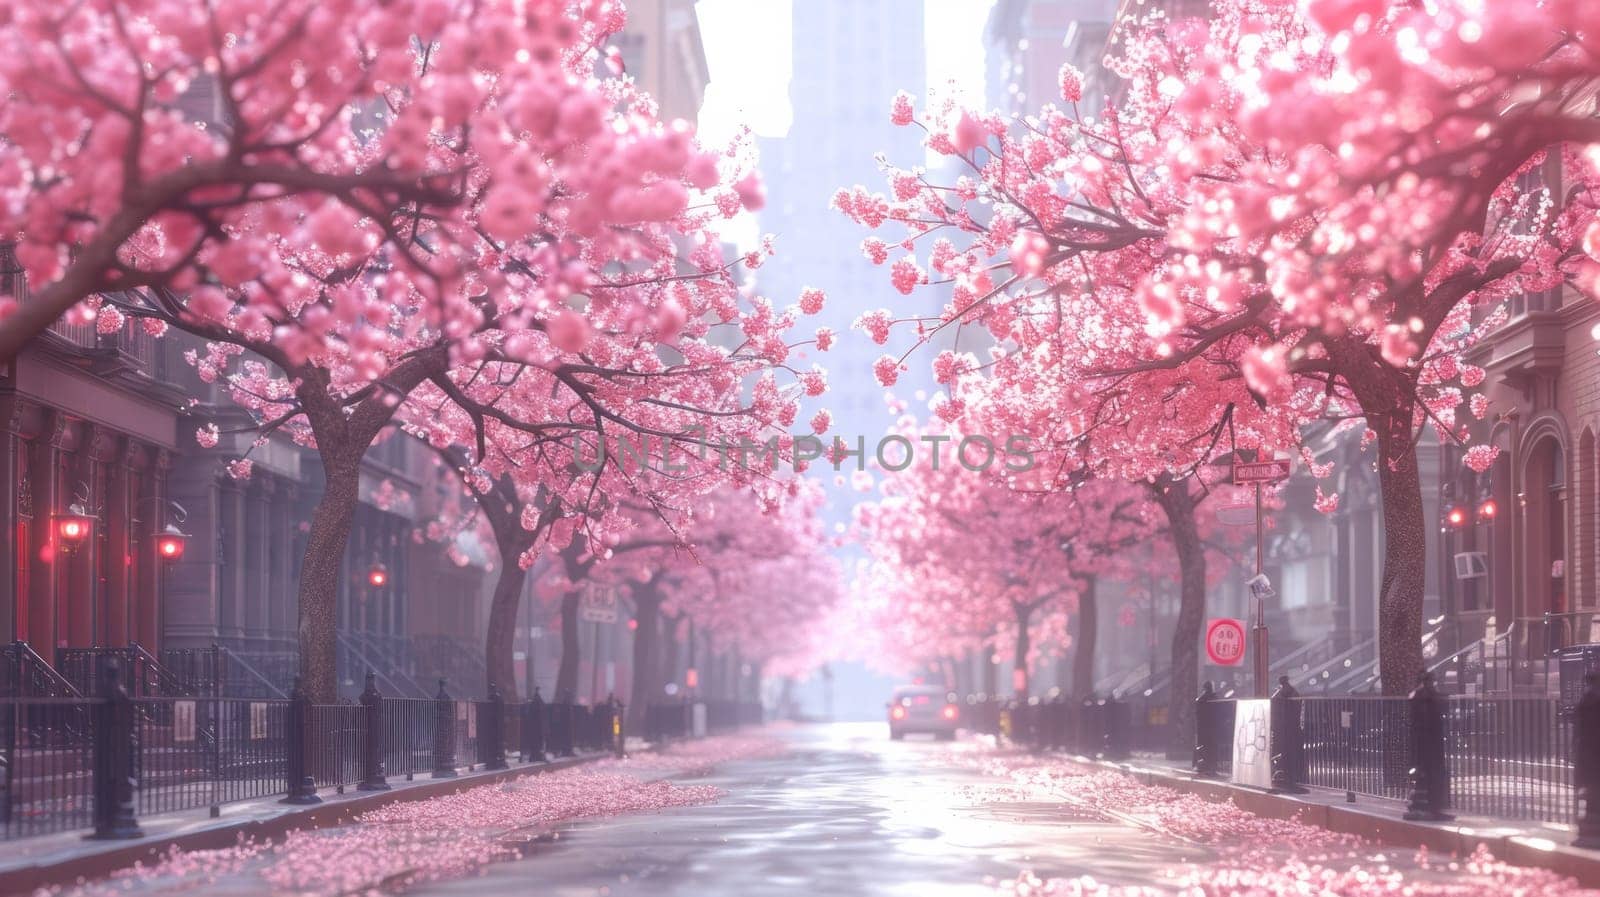 A street lined with pink trees and flowers in bloom